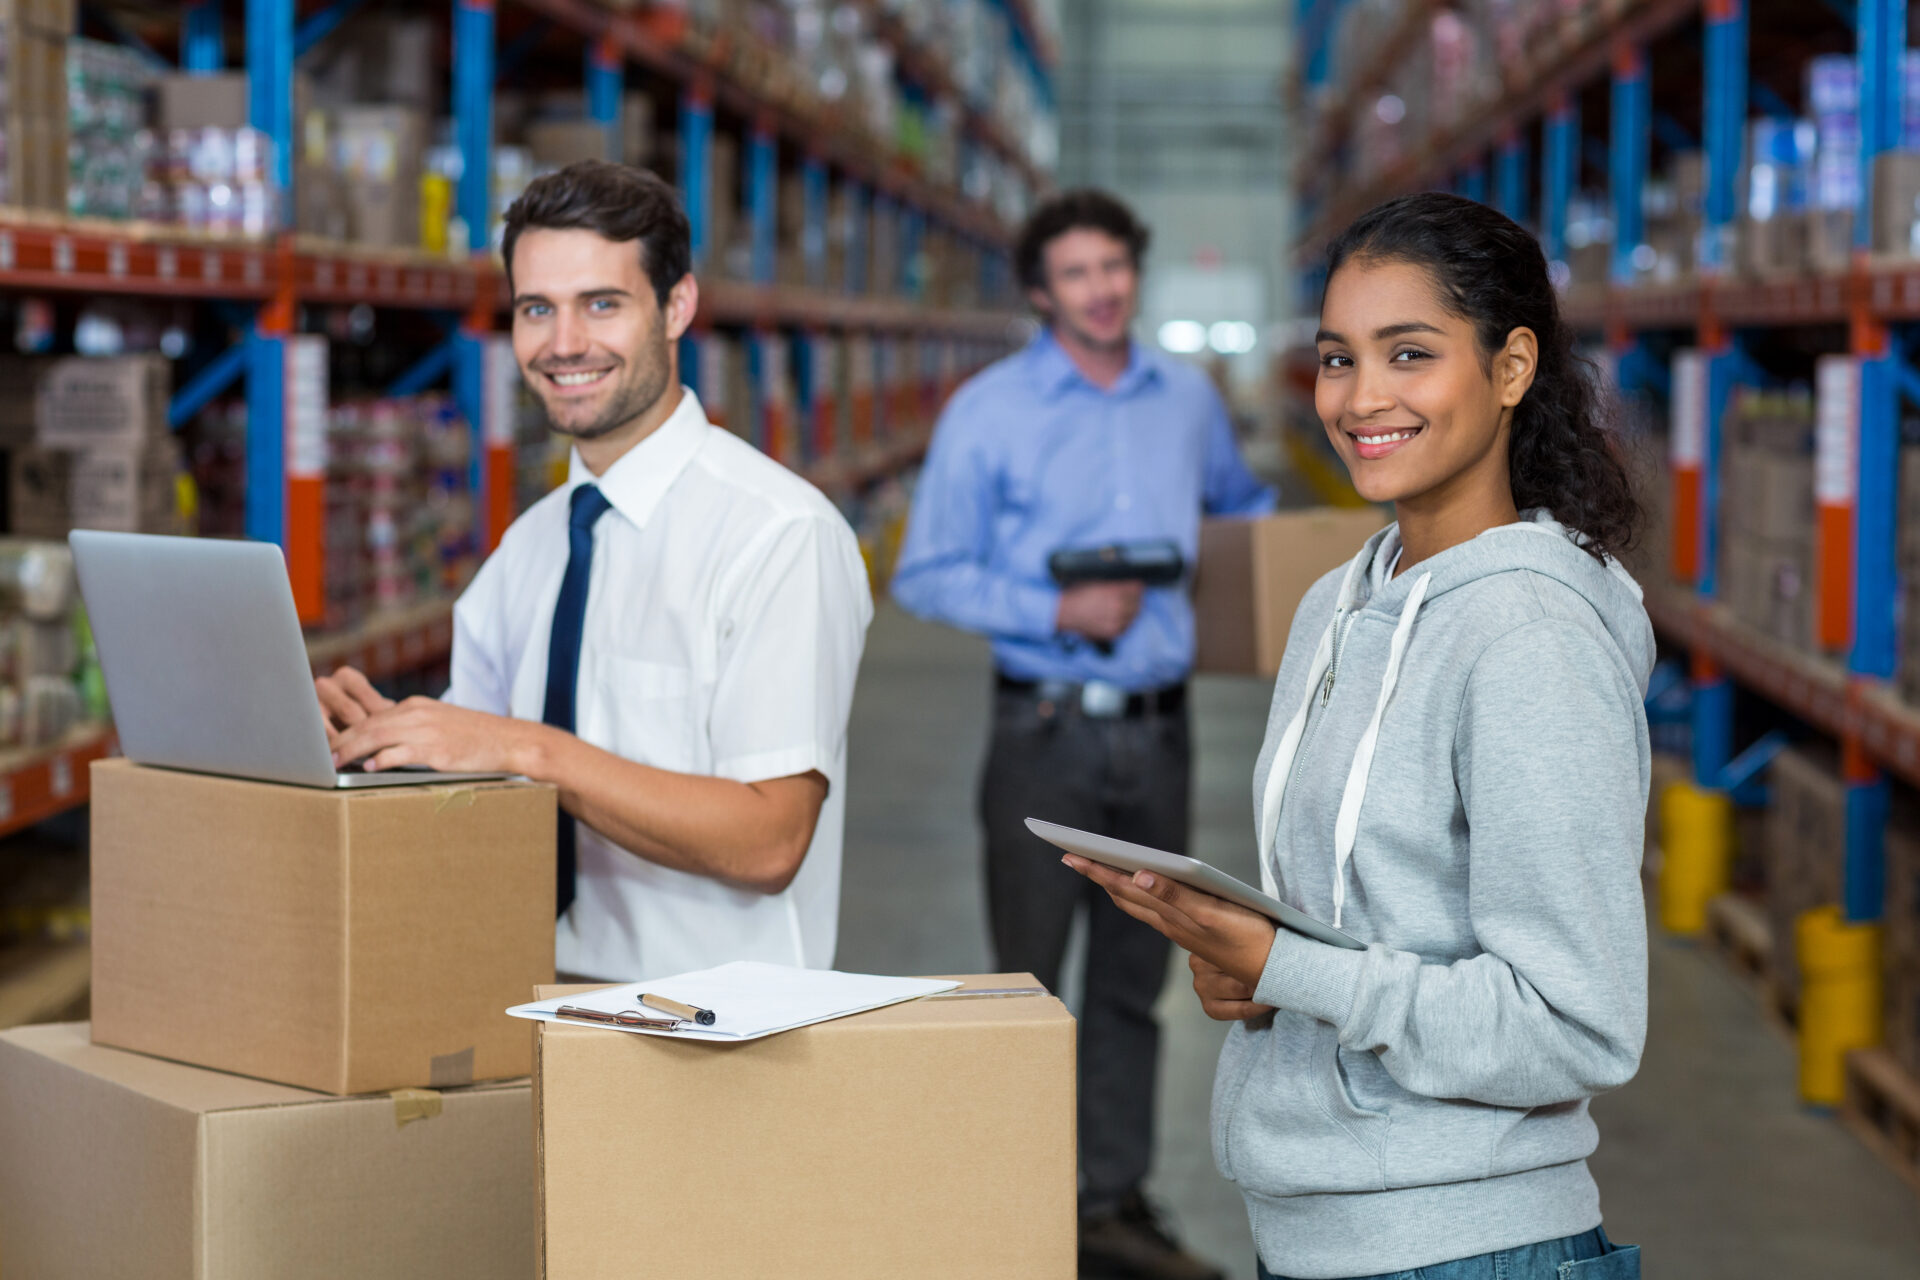 portrait-warehouse-worker-standing-together